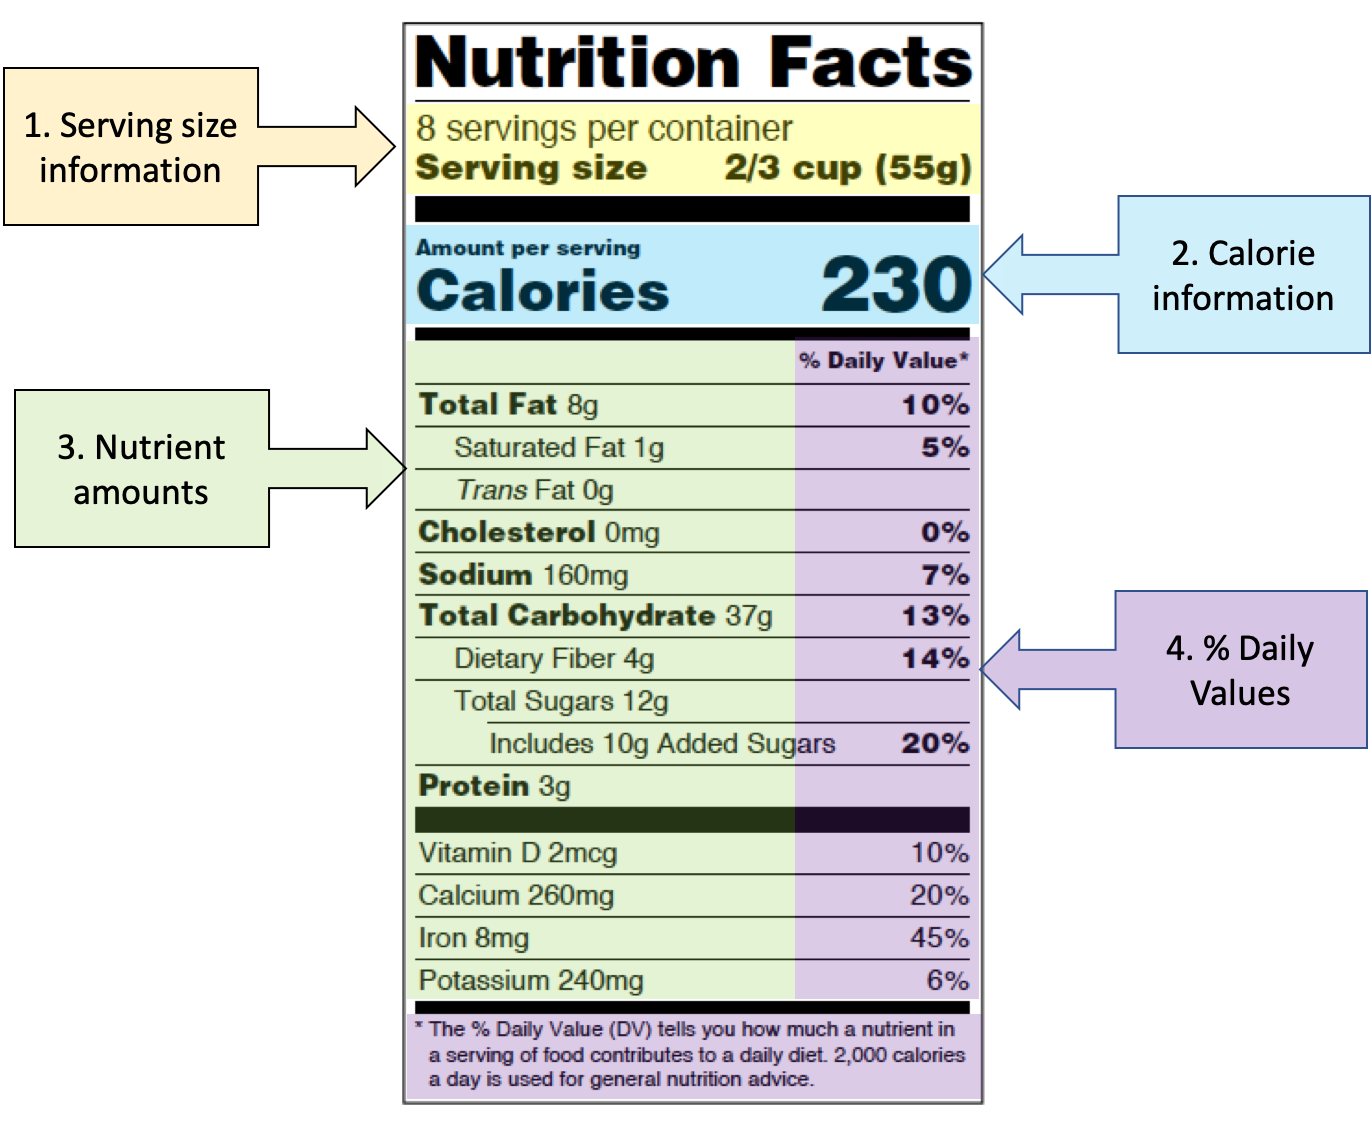 A Nutrition Facts panel is shown, with four main parts highlighted and labeled. The serving size information is highlighted in yellow; the calorie information is highlighted in blue, the nutrient amounts section is highlighted in green, and the % Daily Value section is highlighted in purp